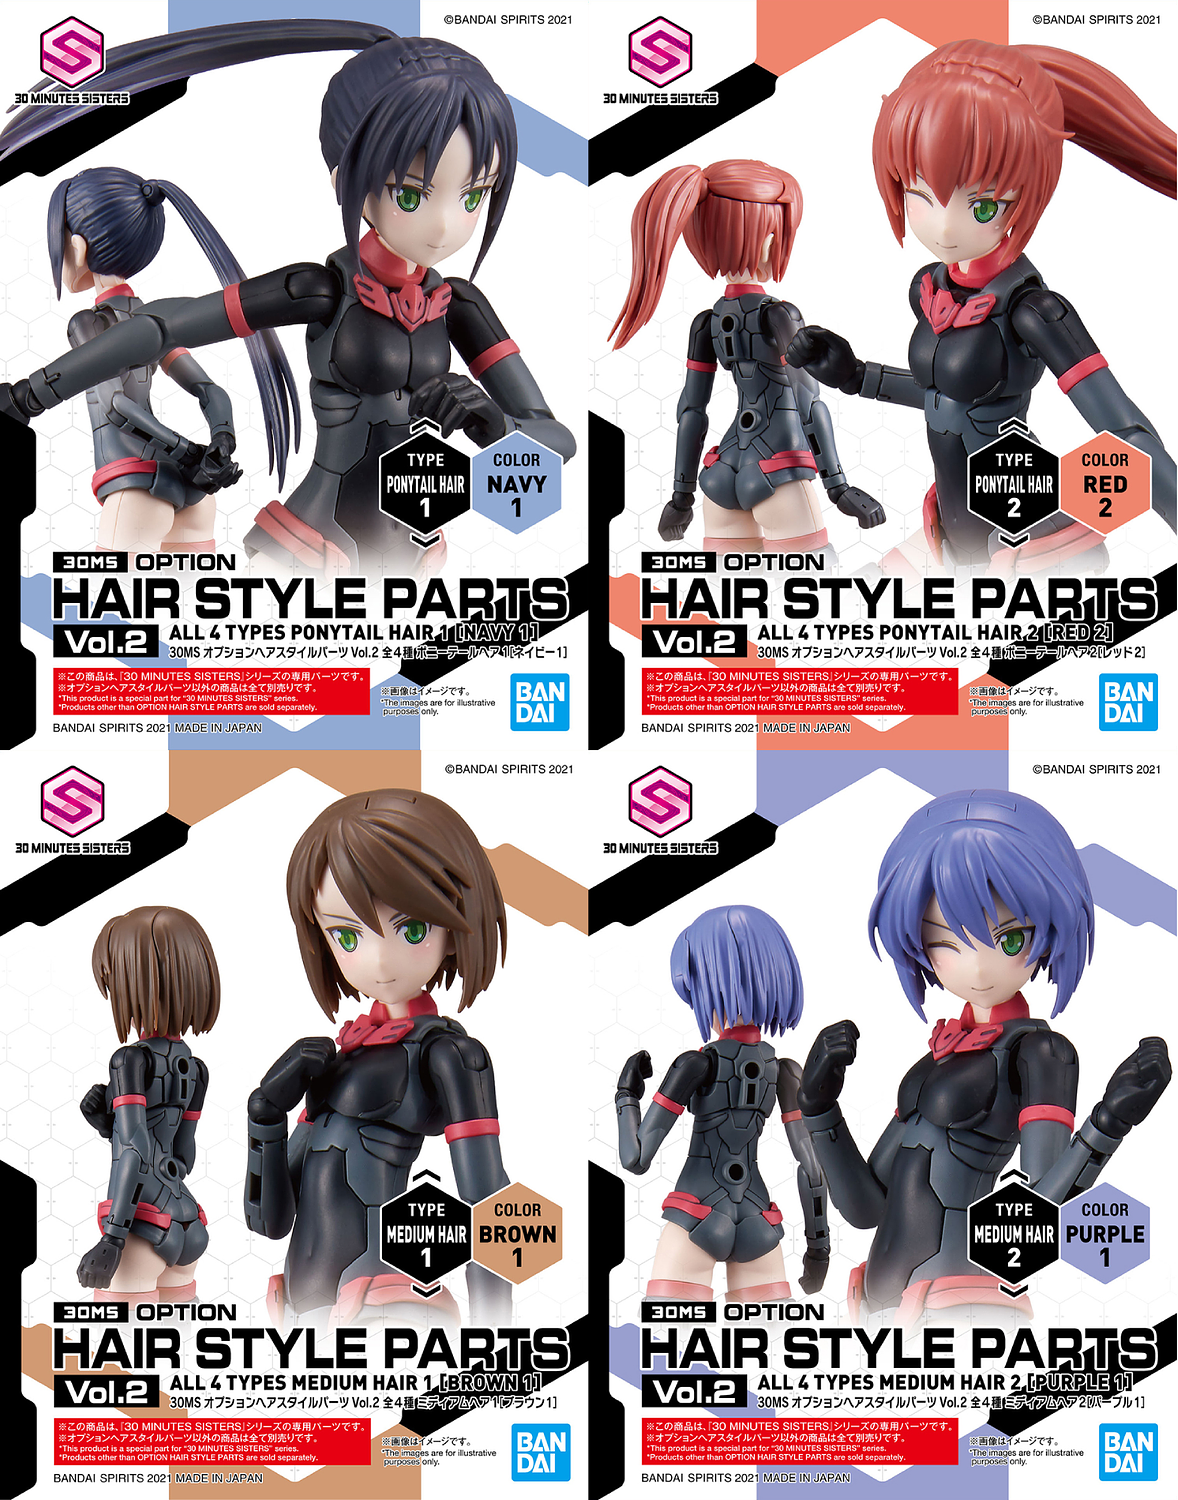 30MS Optional Hairstyle Parts Vol. 2 (Set of 4) 